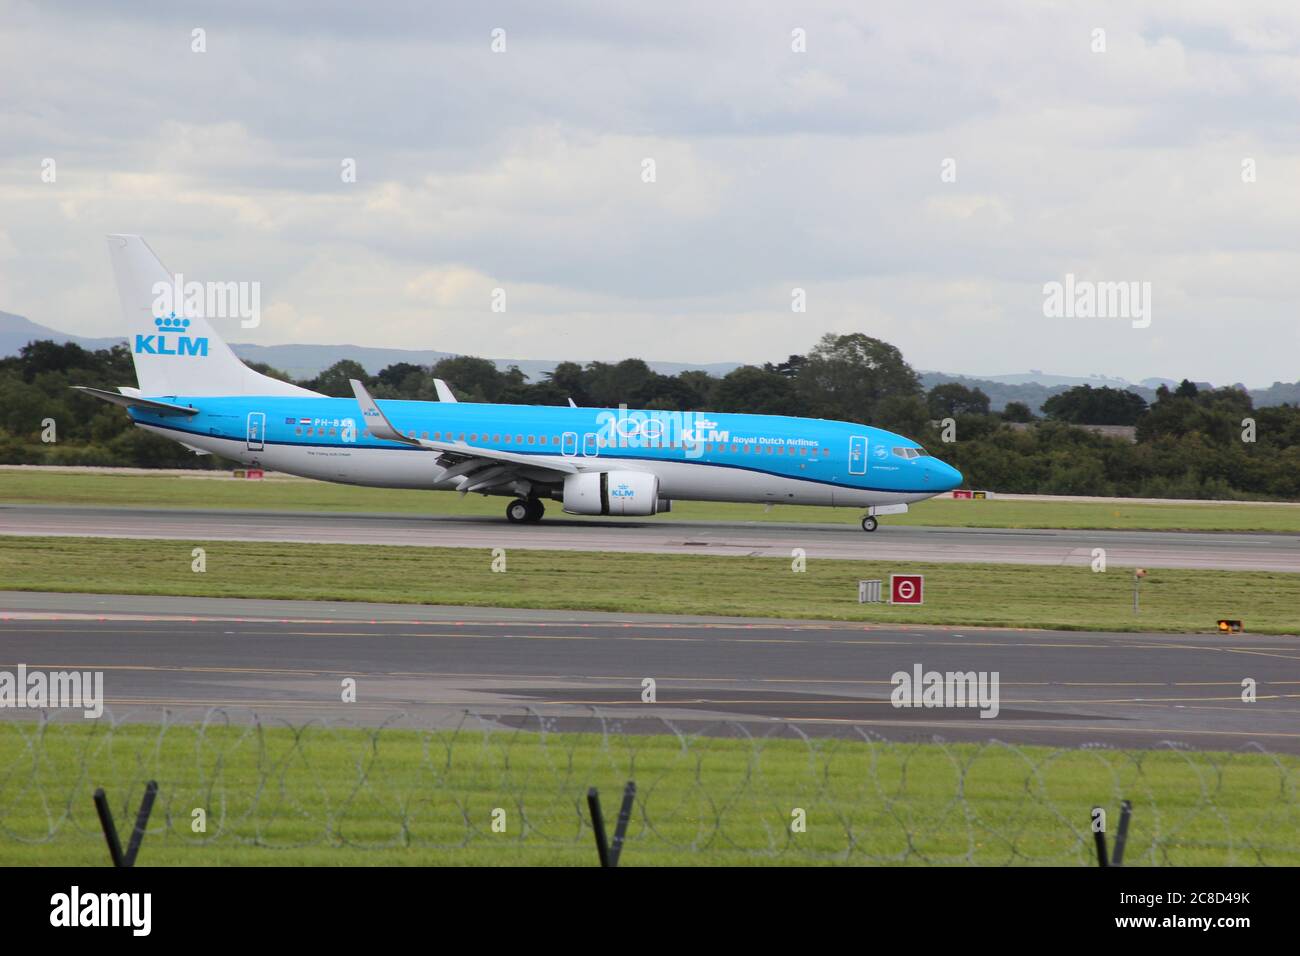 Manchester airport, KLM Royal Dutch Airline Boeing 737-800 Credit ...